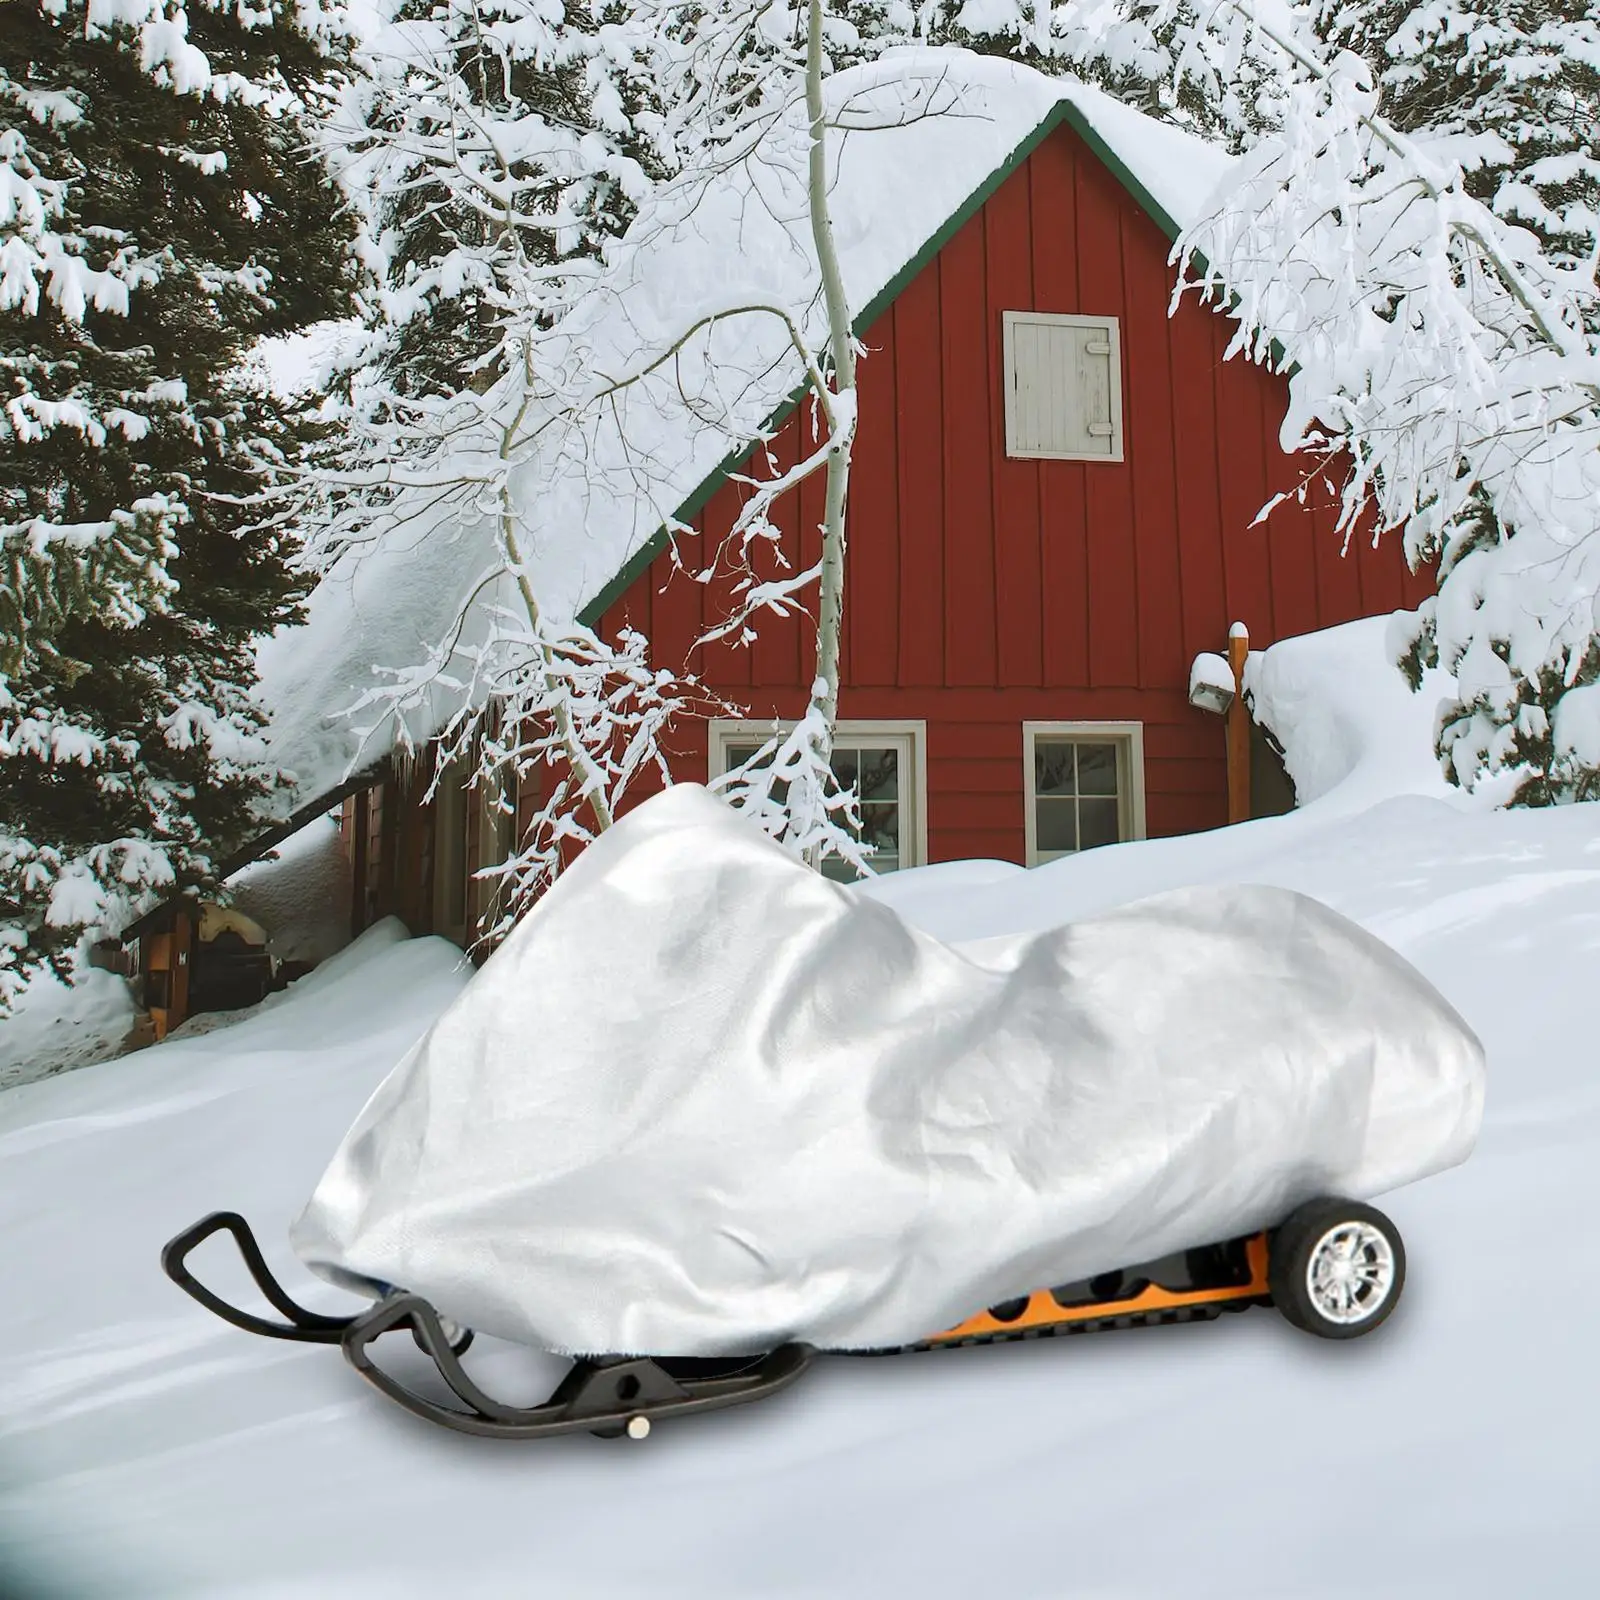 Snow Sled Shield Rain Cover Snowmobile Protective with Drawstring Elastic Snowmobile Cover for Winter Sleigh Sledding Sports